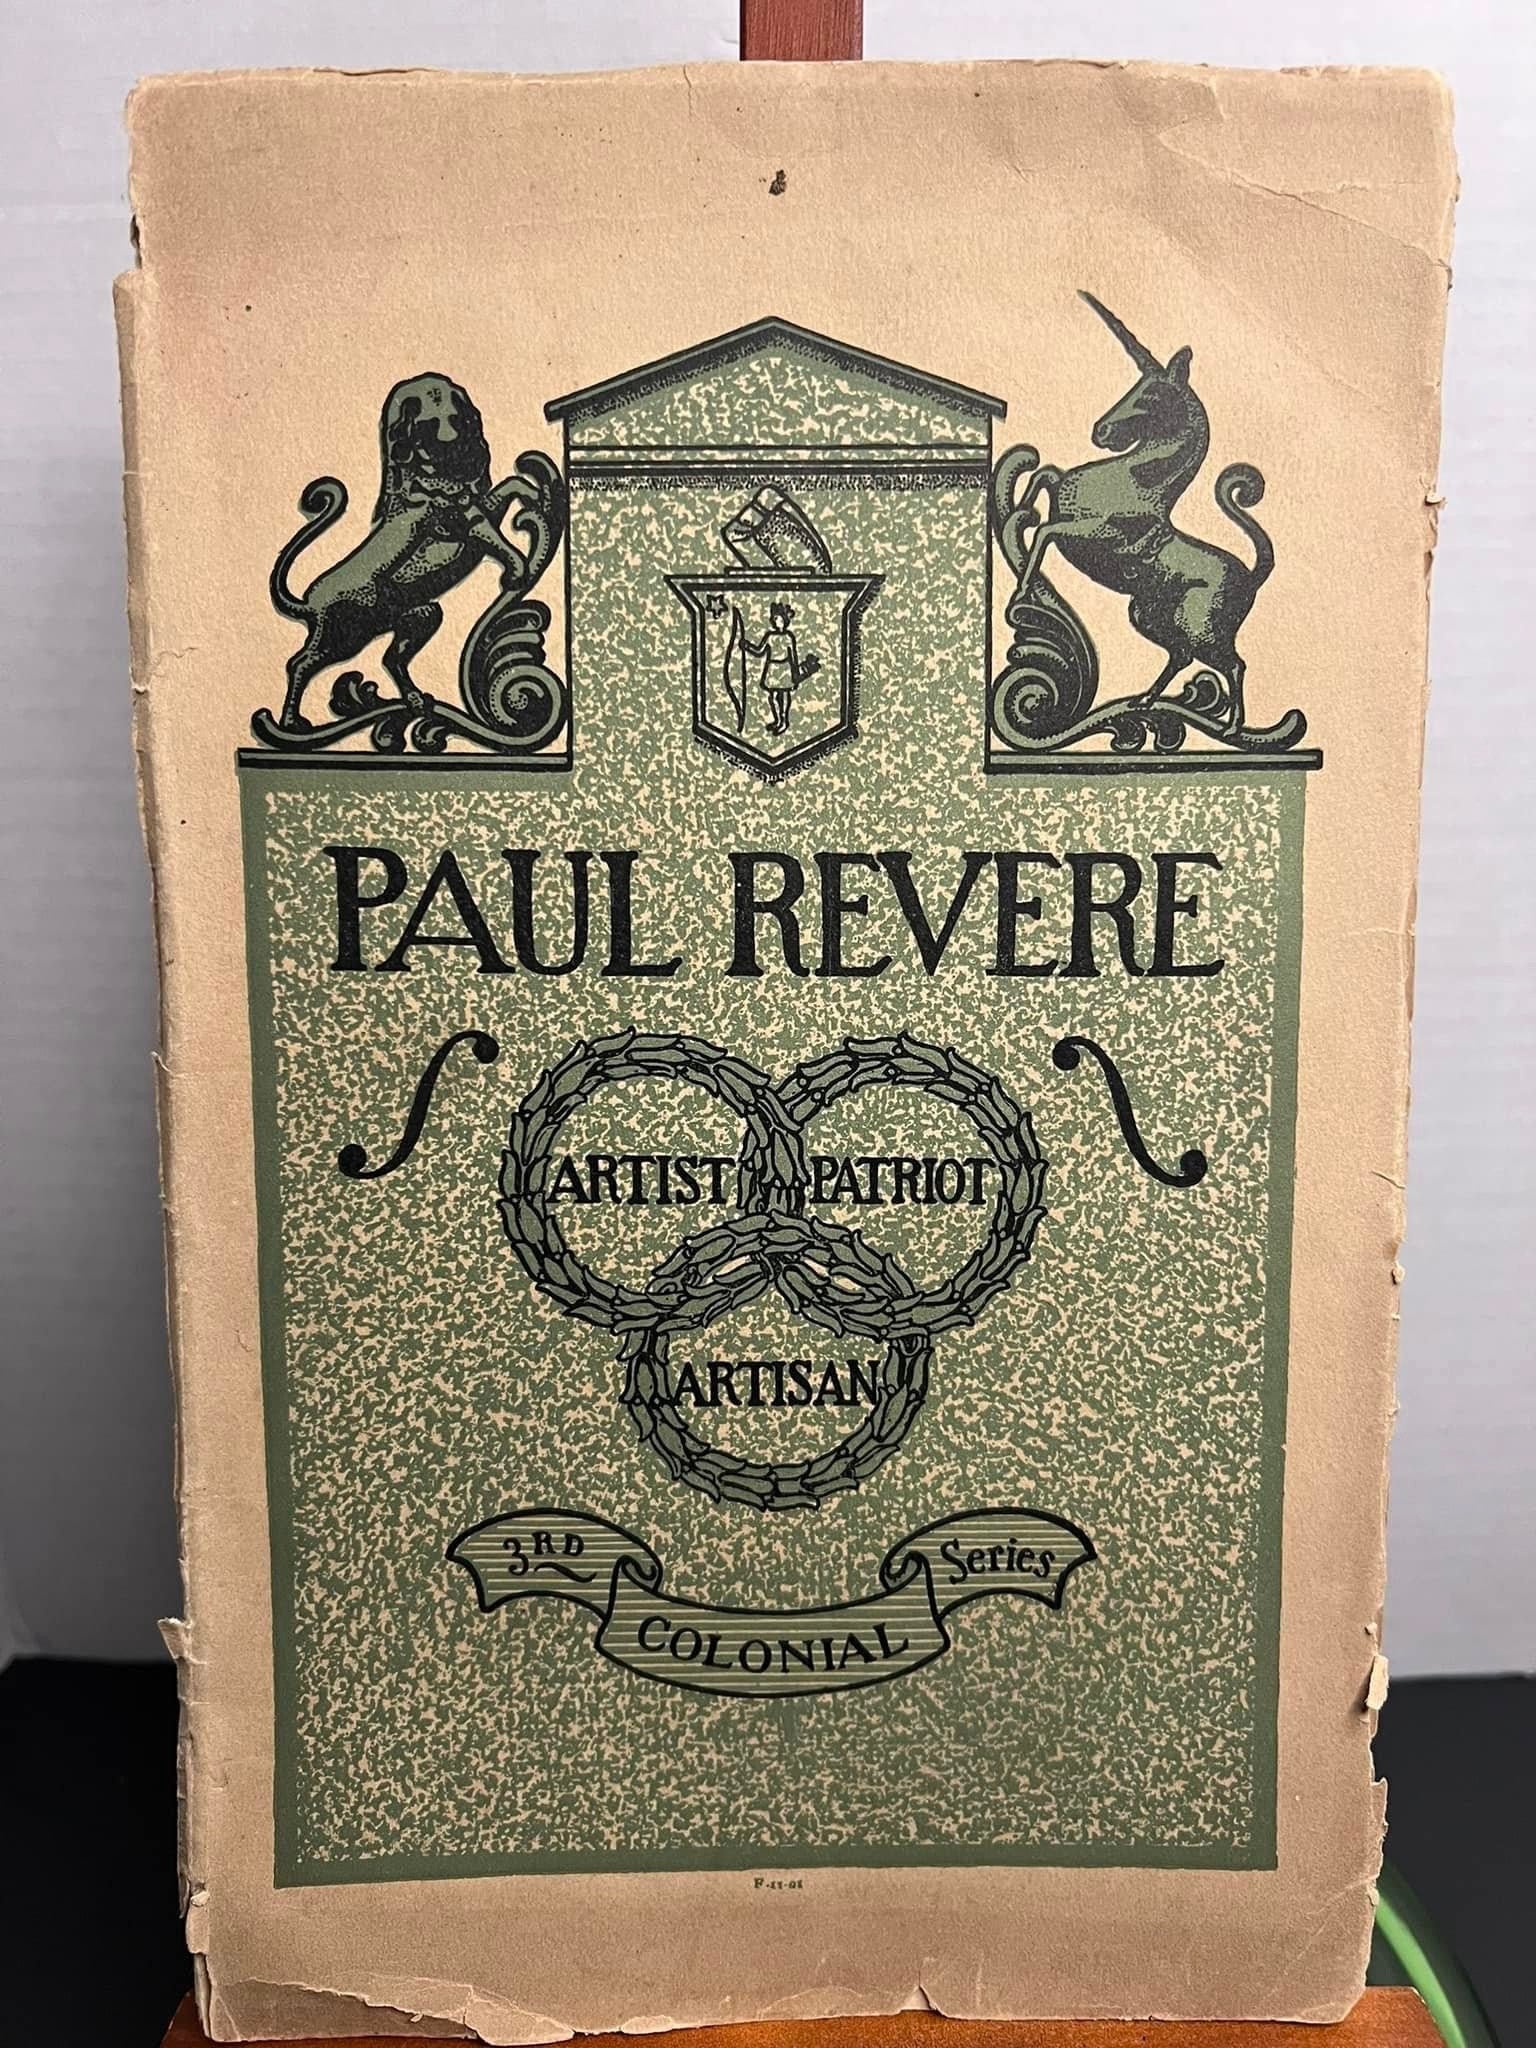 1901 Outline & catalog —of the life and works of Paul revere Printed by the - towle mfg company silversmiths - Newburyport mass 1901